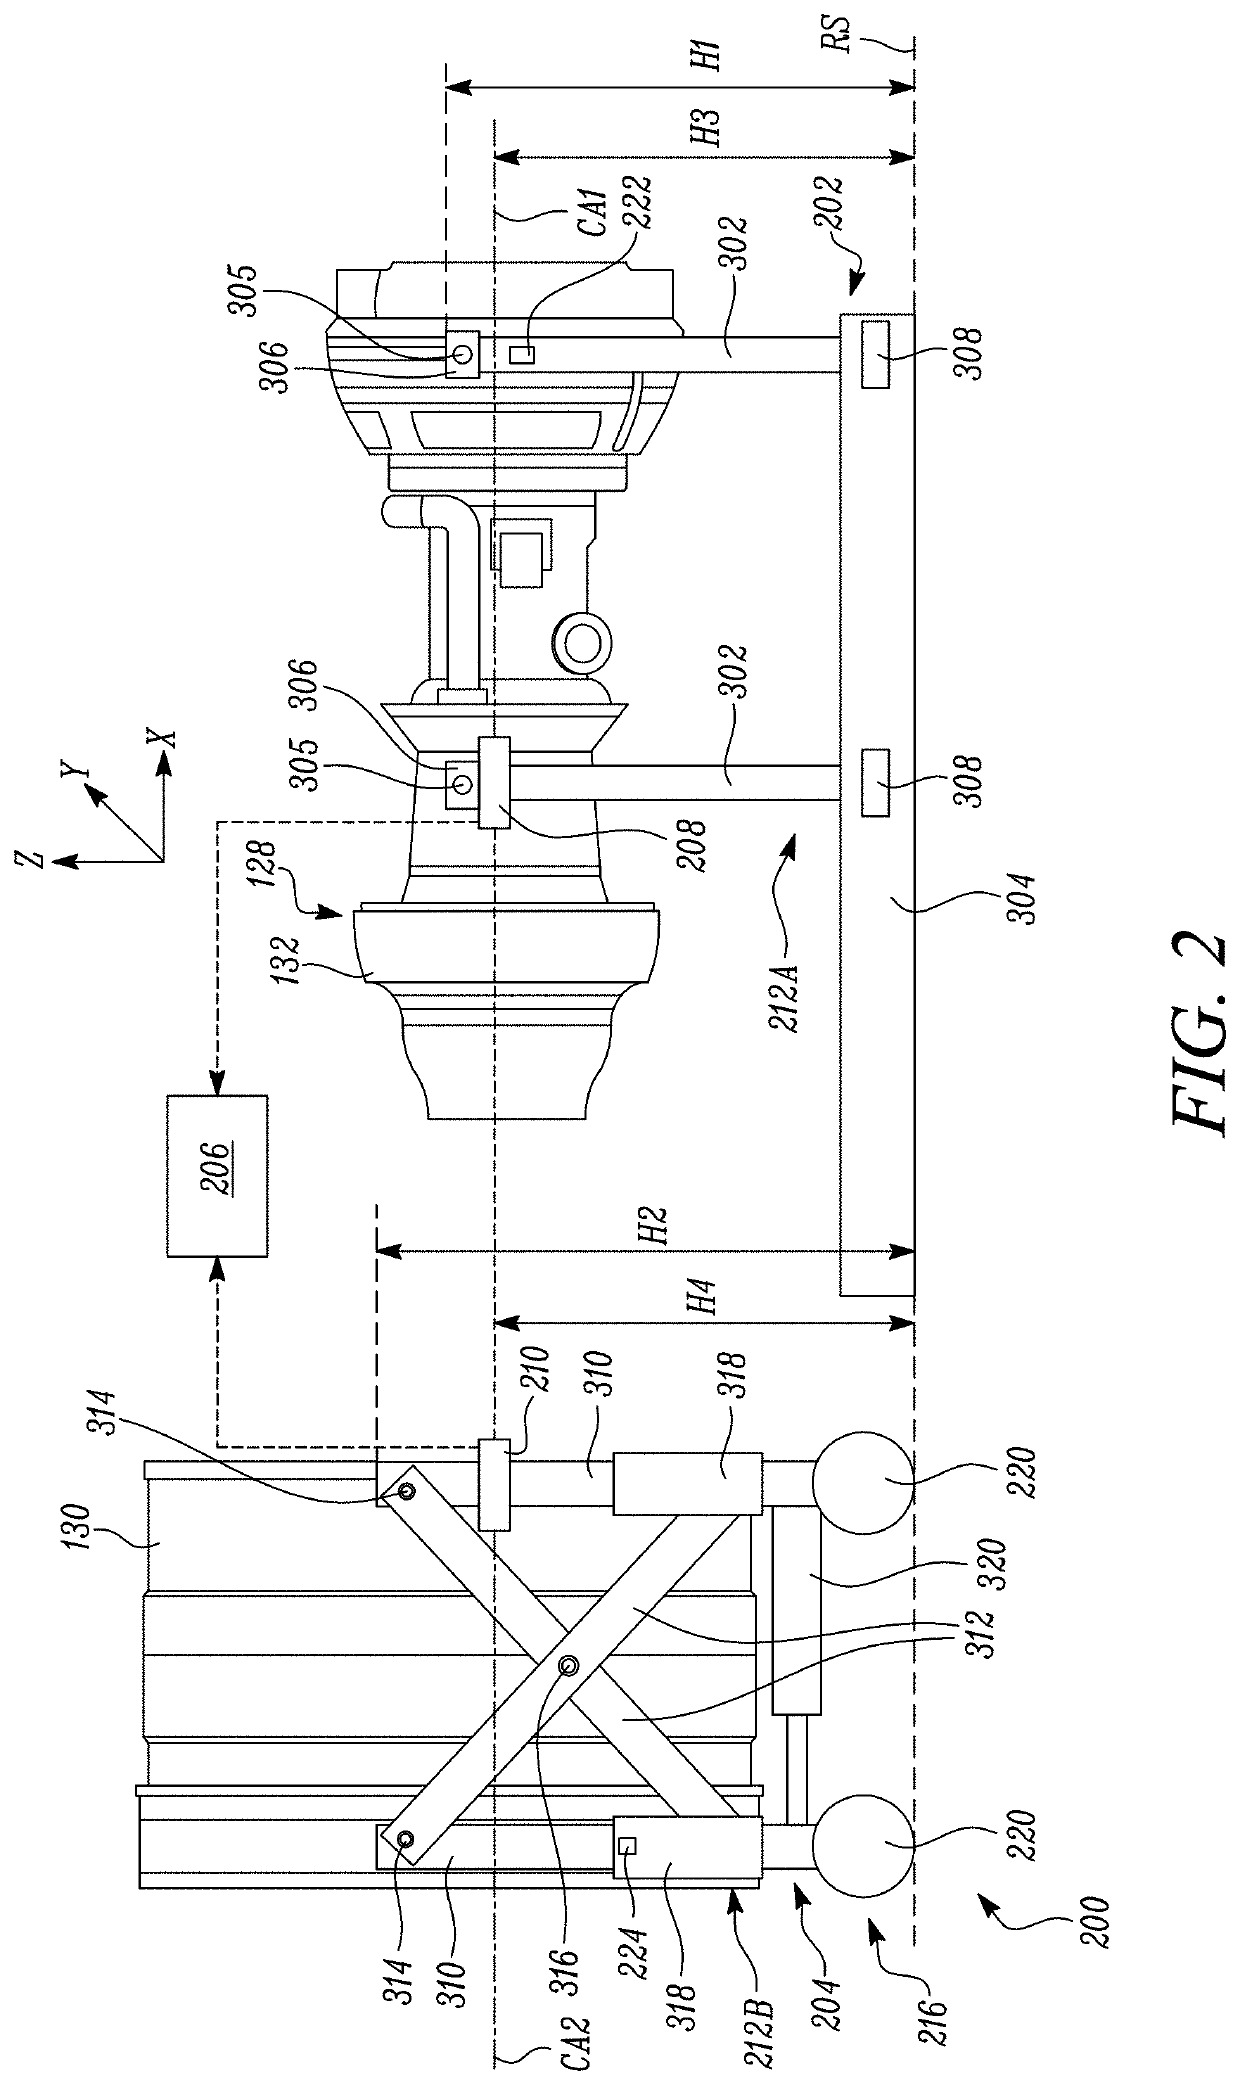 System and method for assembling components of a gas turbine engine